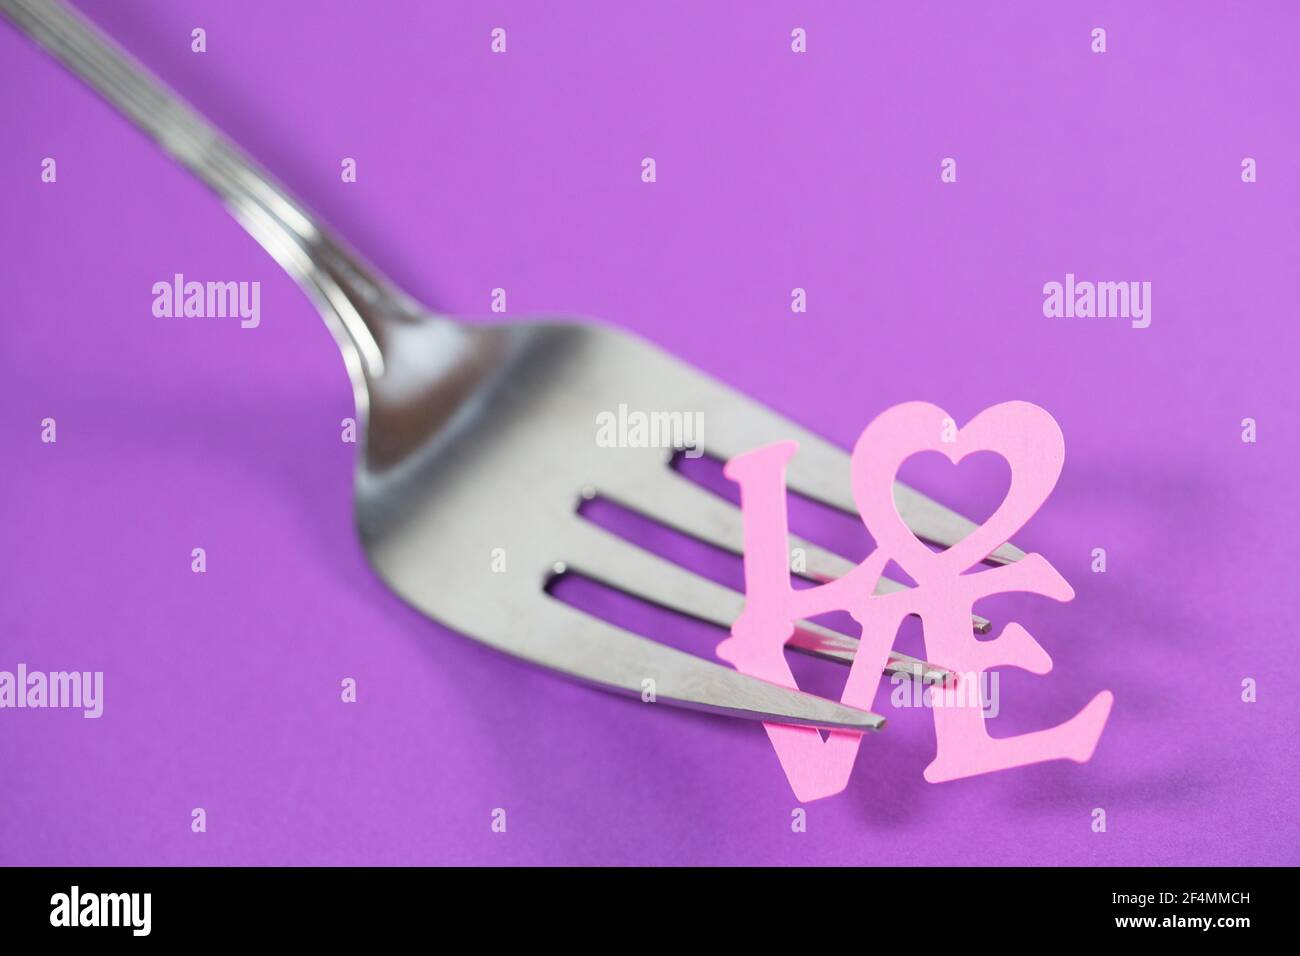 A forkful of love. Stock Photo